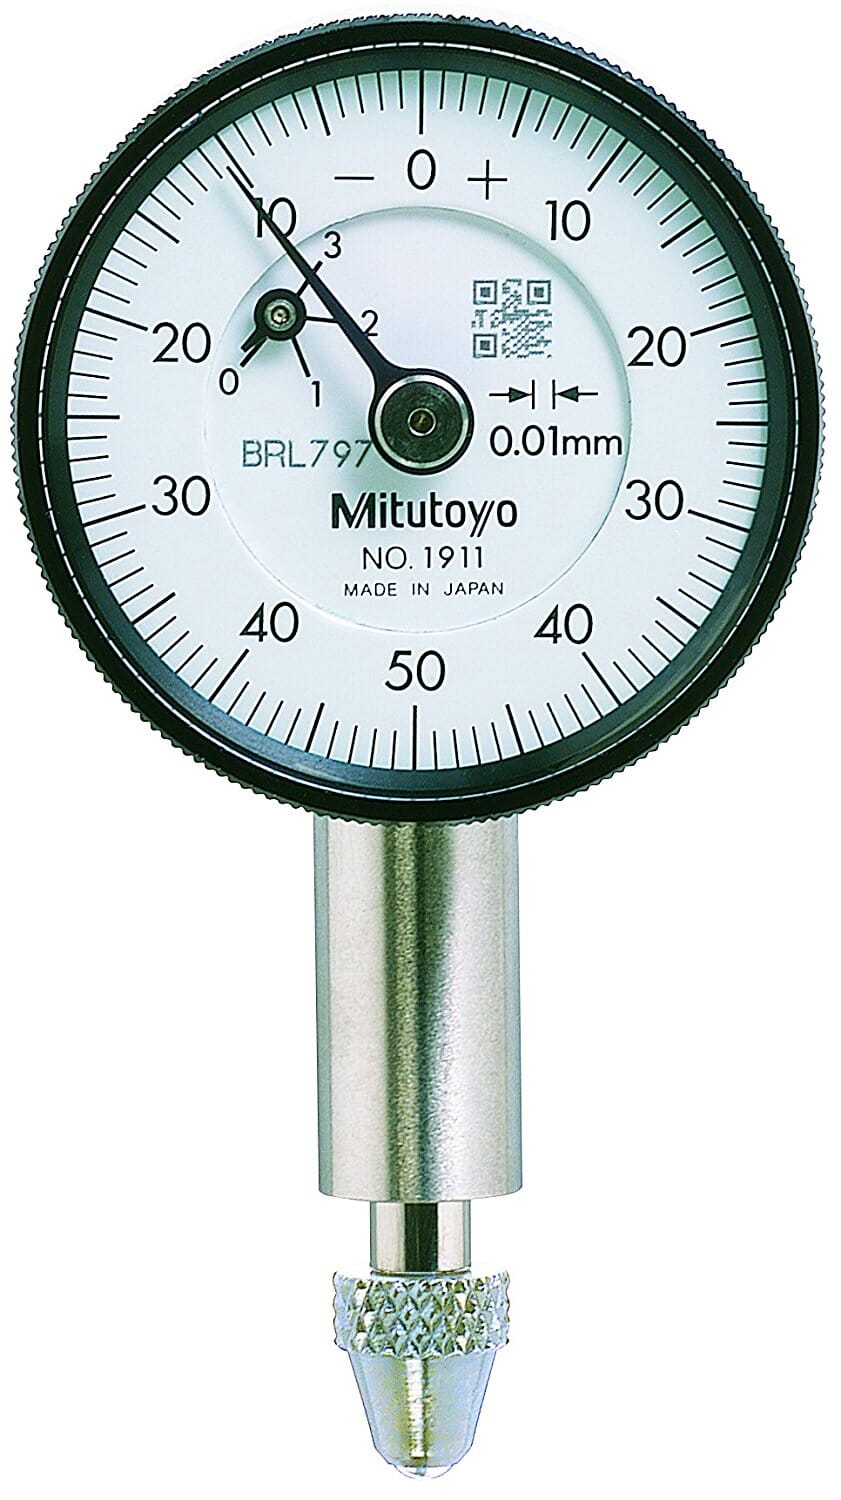 Mitutoyo Dial Indicator 2.5Mm X 0.01Mm